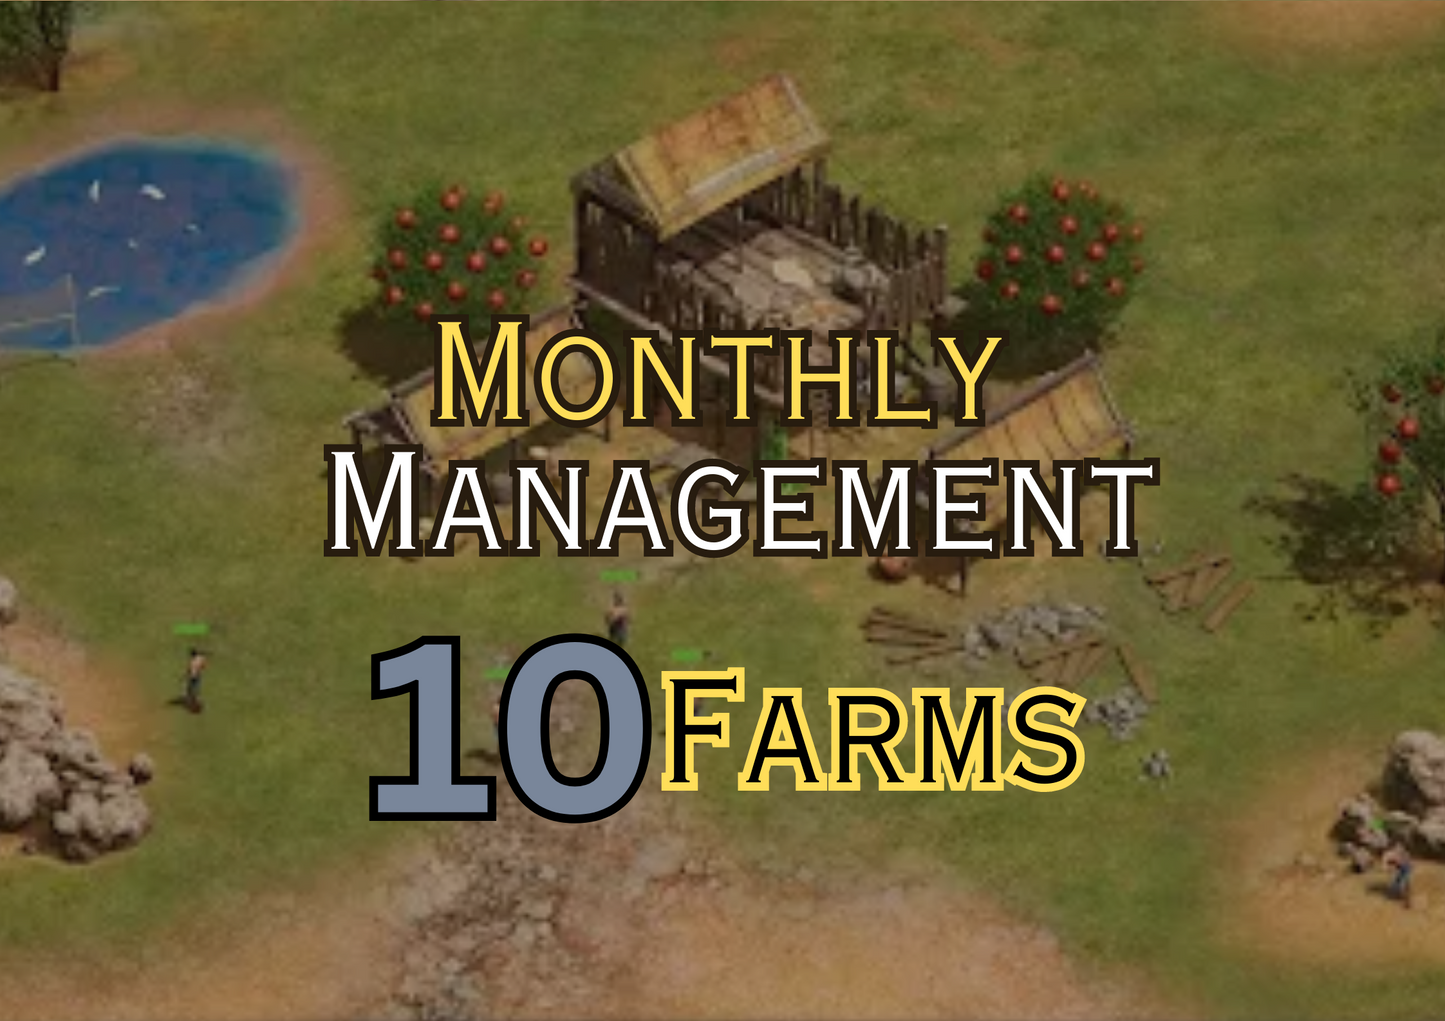 Monthly Management for 10 farms